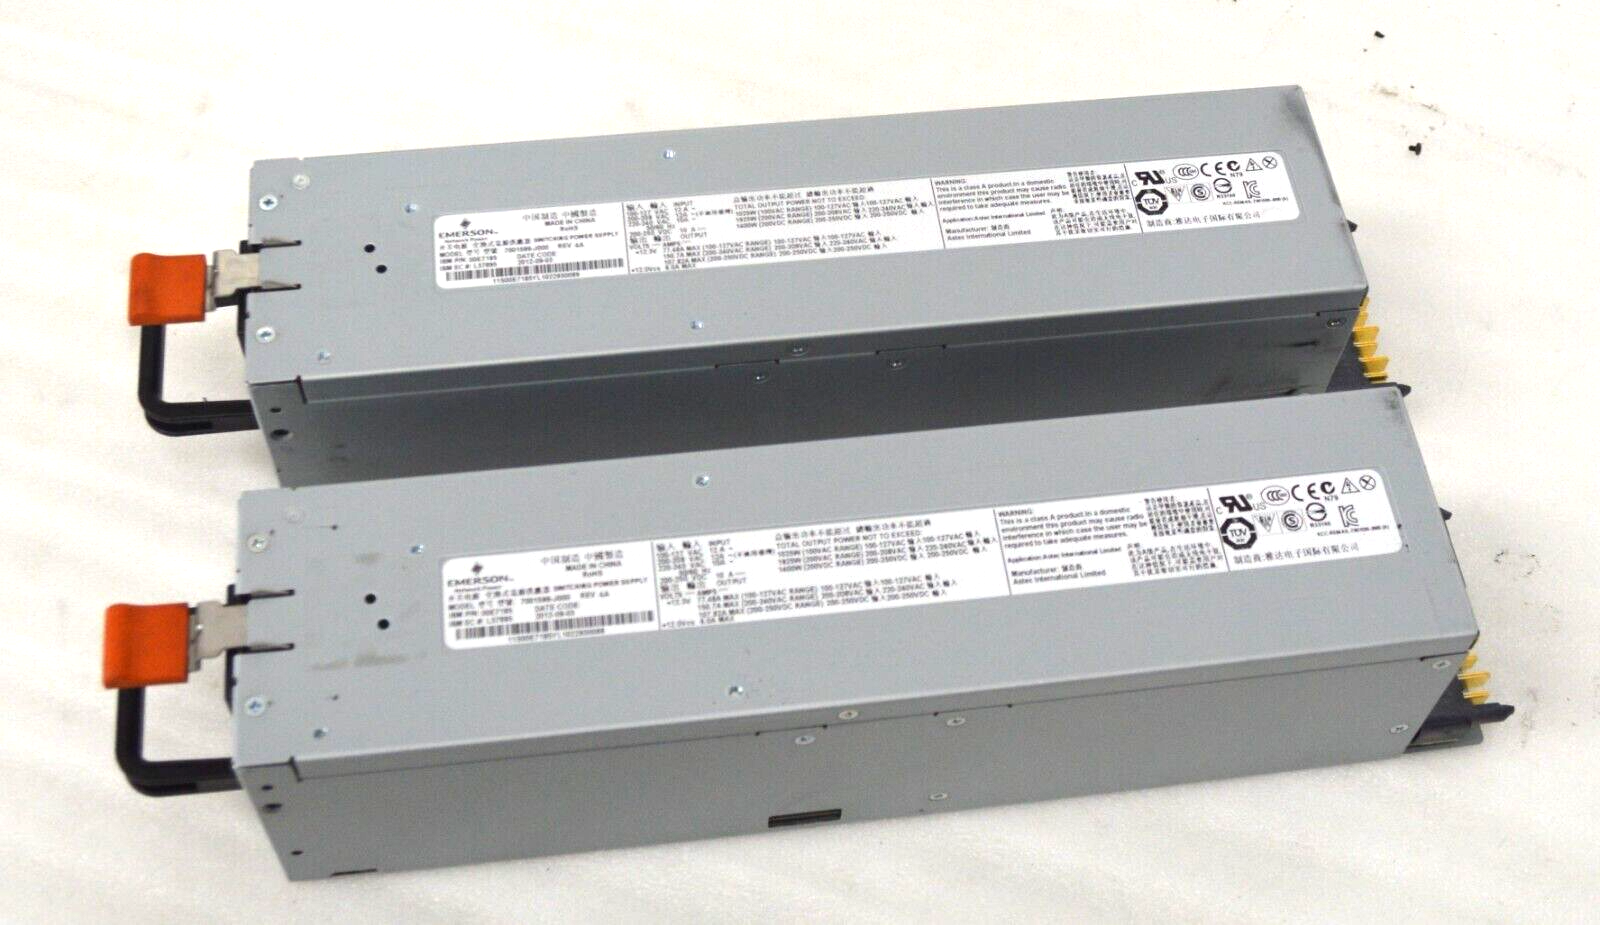 Primary image for Lot of 2 Emerson 7001599-J000 IBM P/N 00E7185 Switching Power Supply